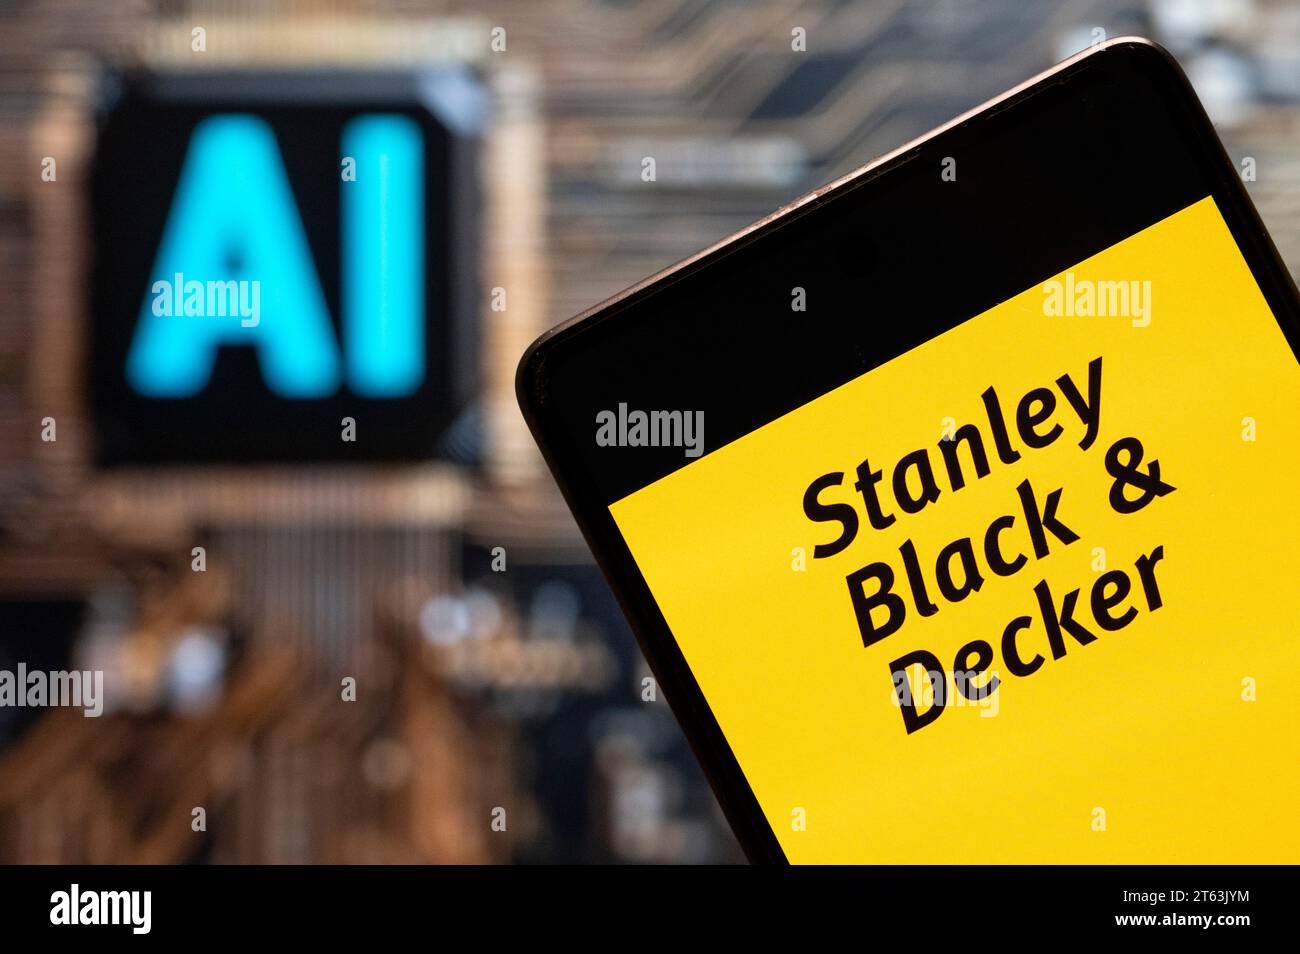 61 Stanley Black Decker Images, Stock Photos, 3D objects